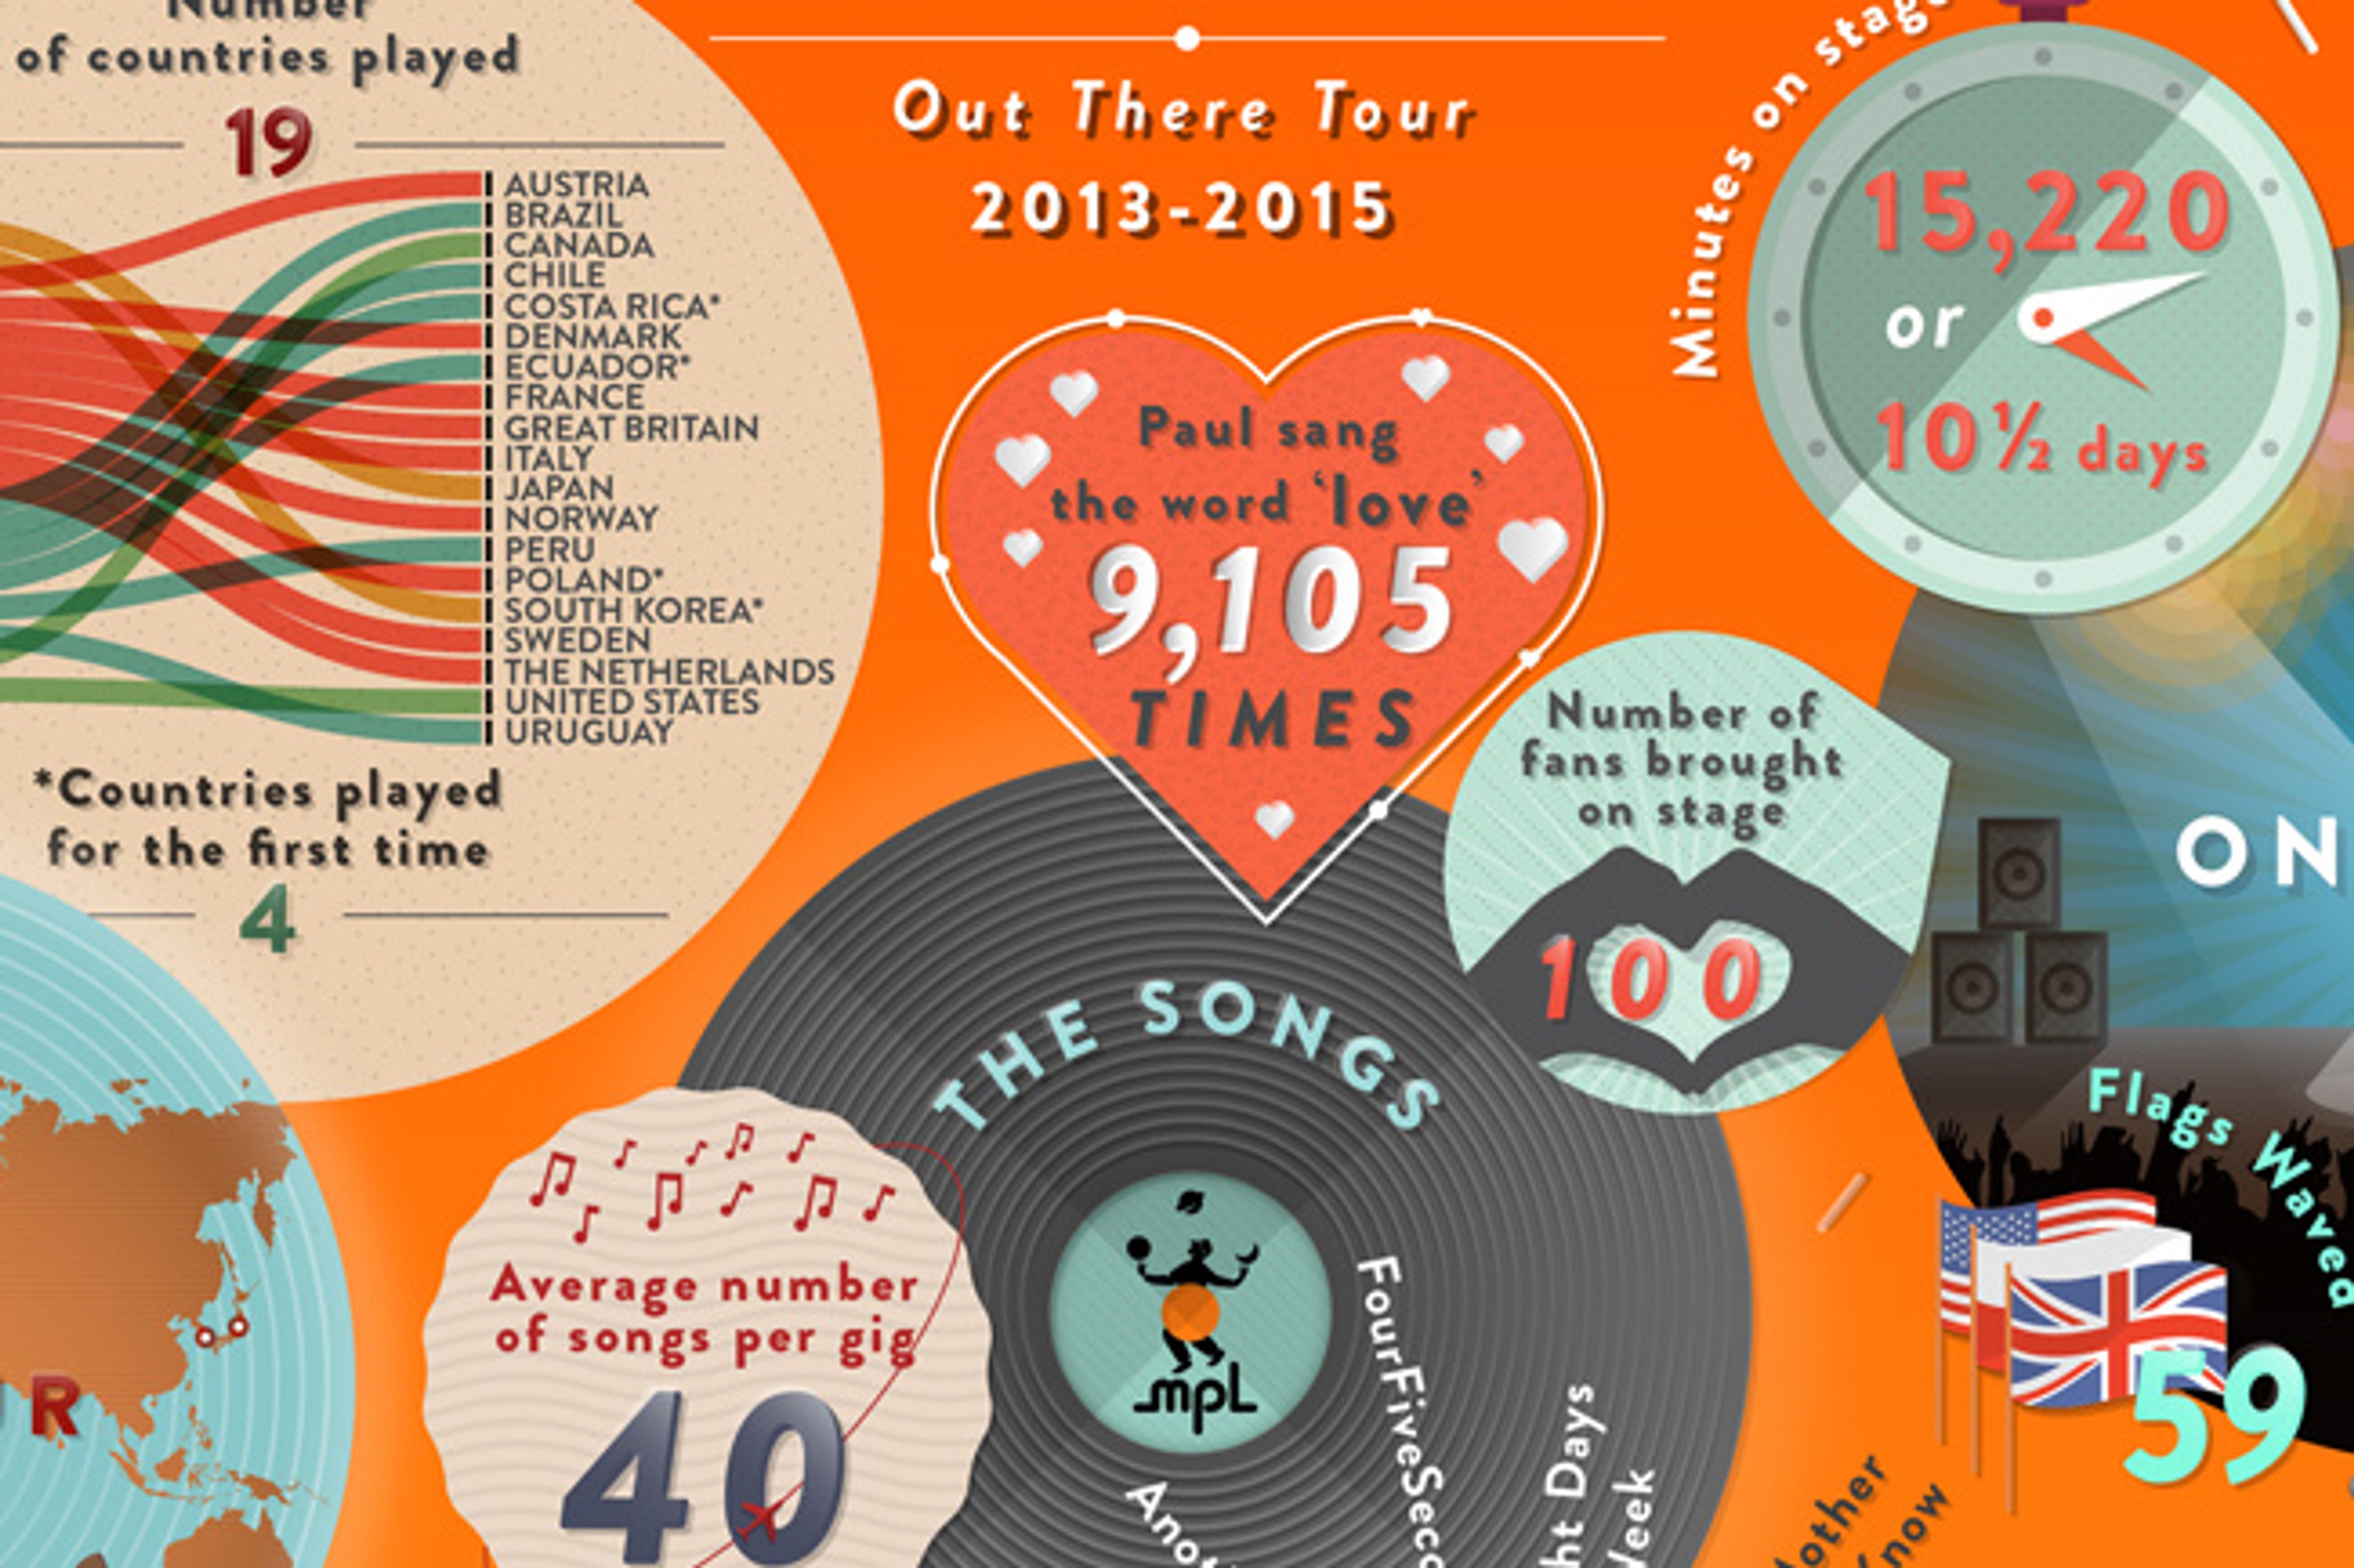 'Out There' Tour Infographic